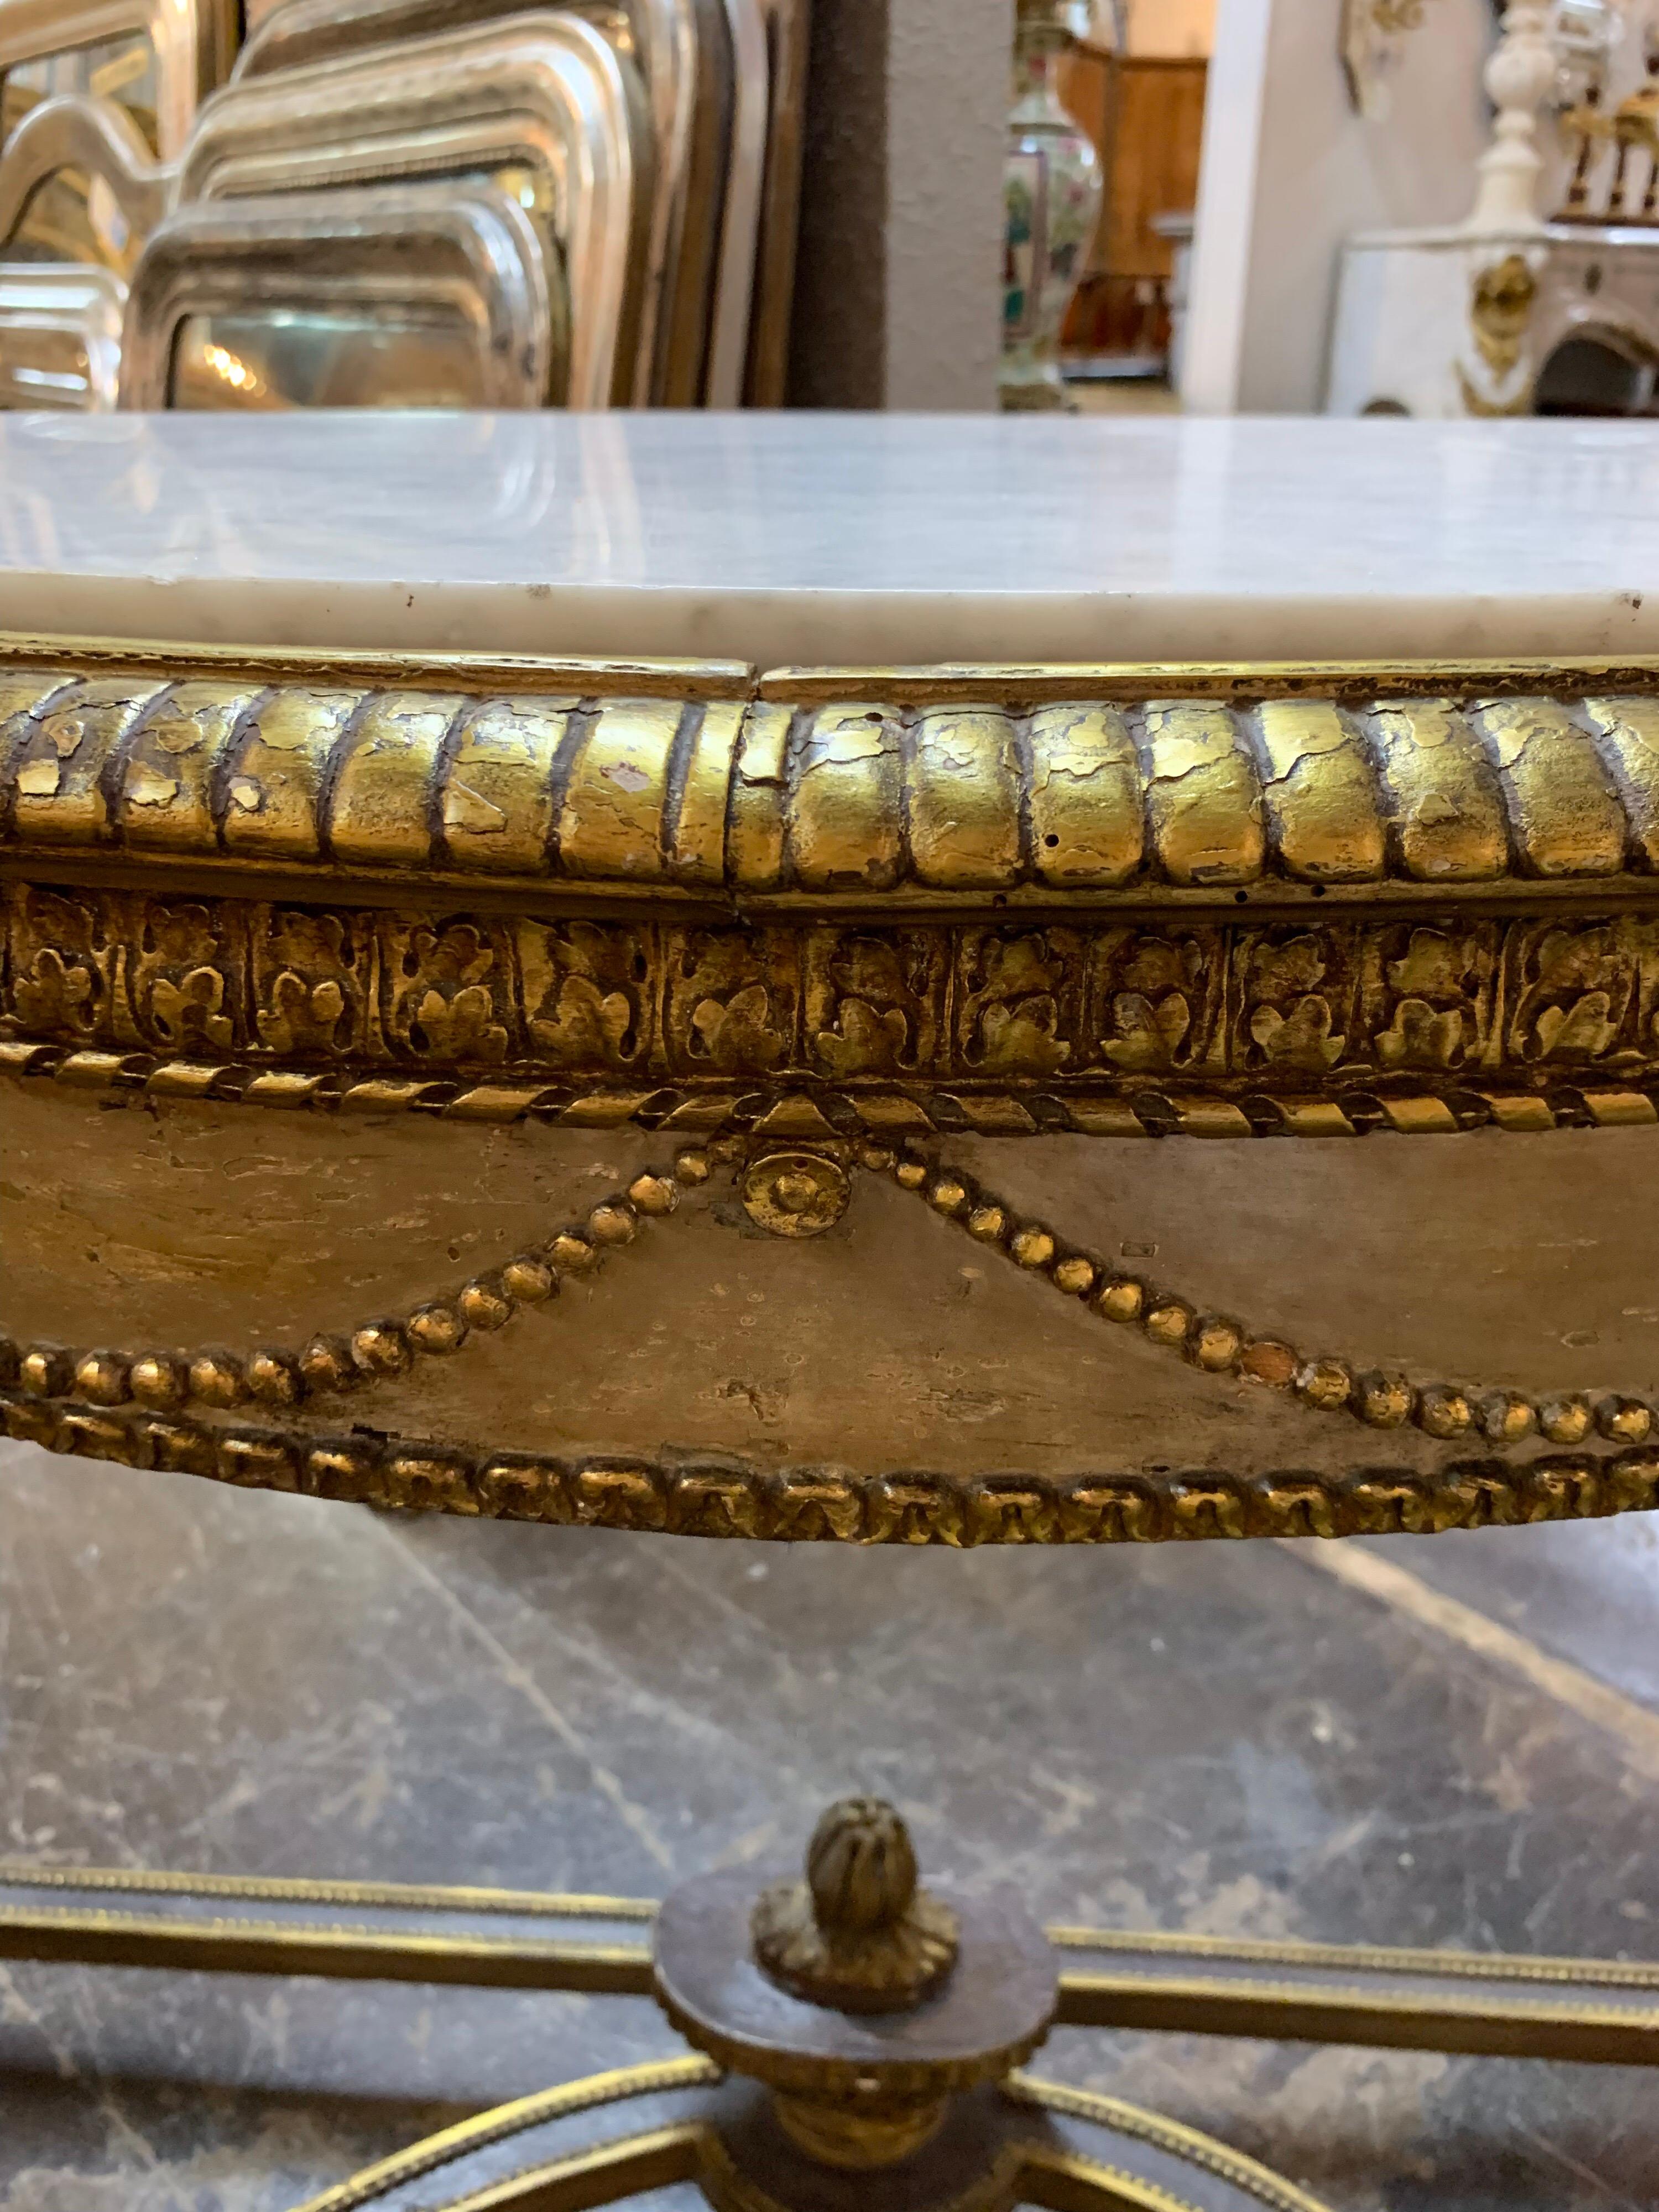 19th century Louis XVI carved demilune parcel gilt console table. The table is beautifully carved and has a Carrera marble top. Classic French style and quality make this a wonderful addition to any fine home.